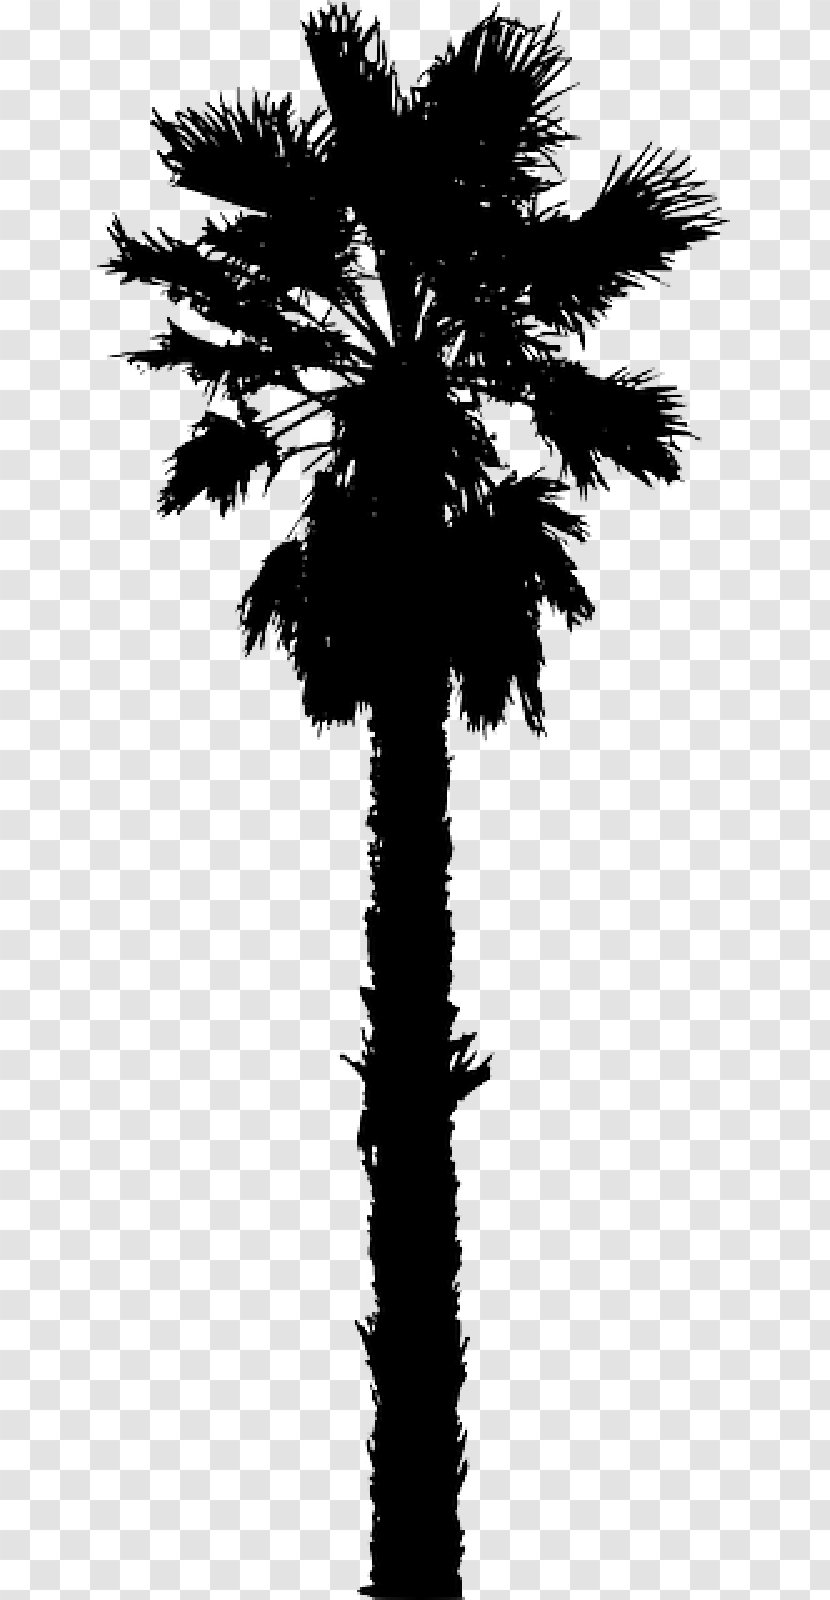 California Palm Clip Art Trees Vector Graphics - Tree Silhouettes Transparent PNG